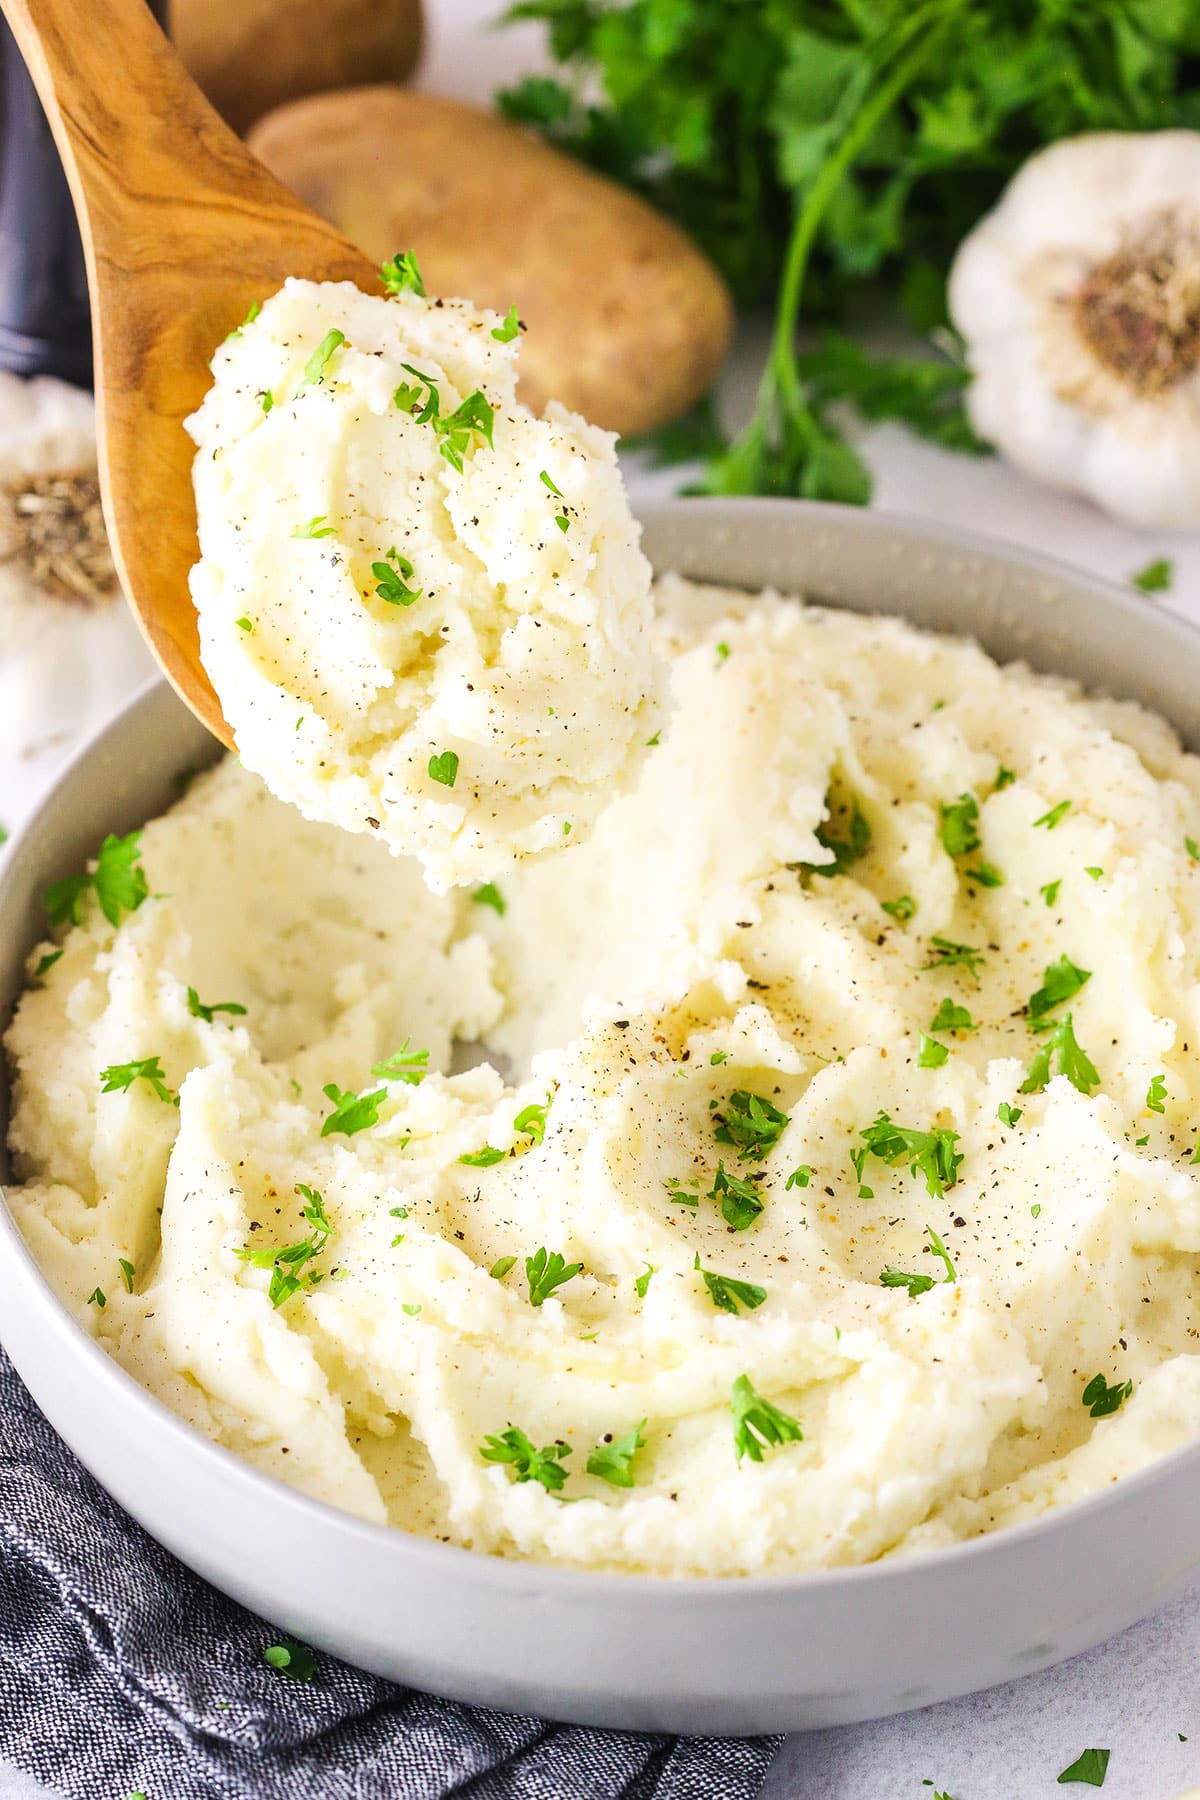 Chunky Garlic Mashed Potatoes in a white bowl with a wooden spoon scooping a serving